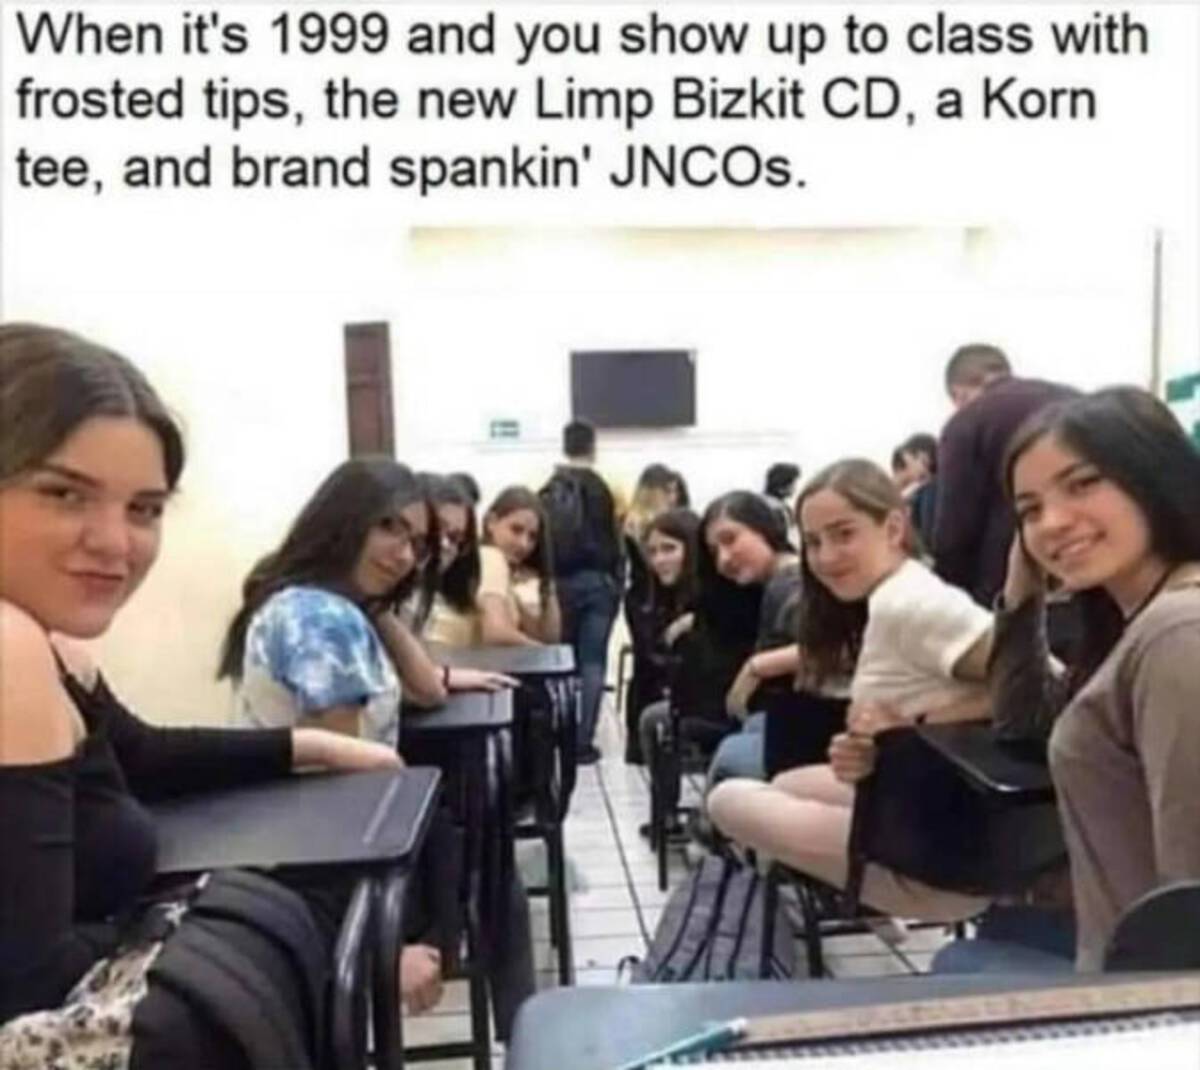 pov your name is in the math problem - When it's 1999 and you show up to class with frosted tips, the new Limp Bizkit Cd, a Korn tee, and brand spankin' JNCOs.